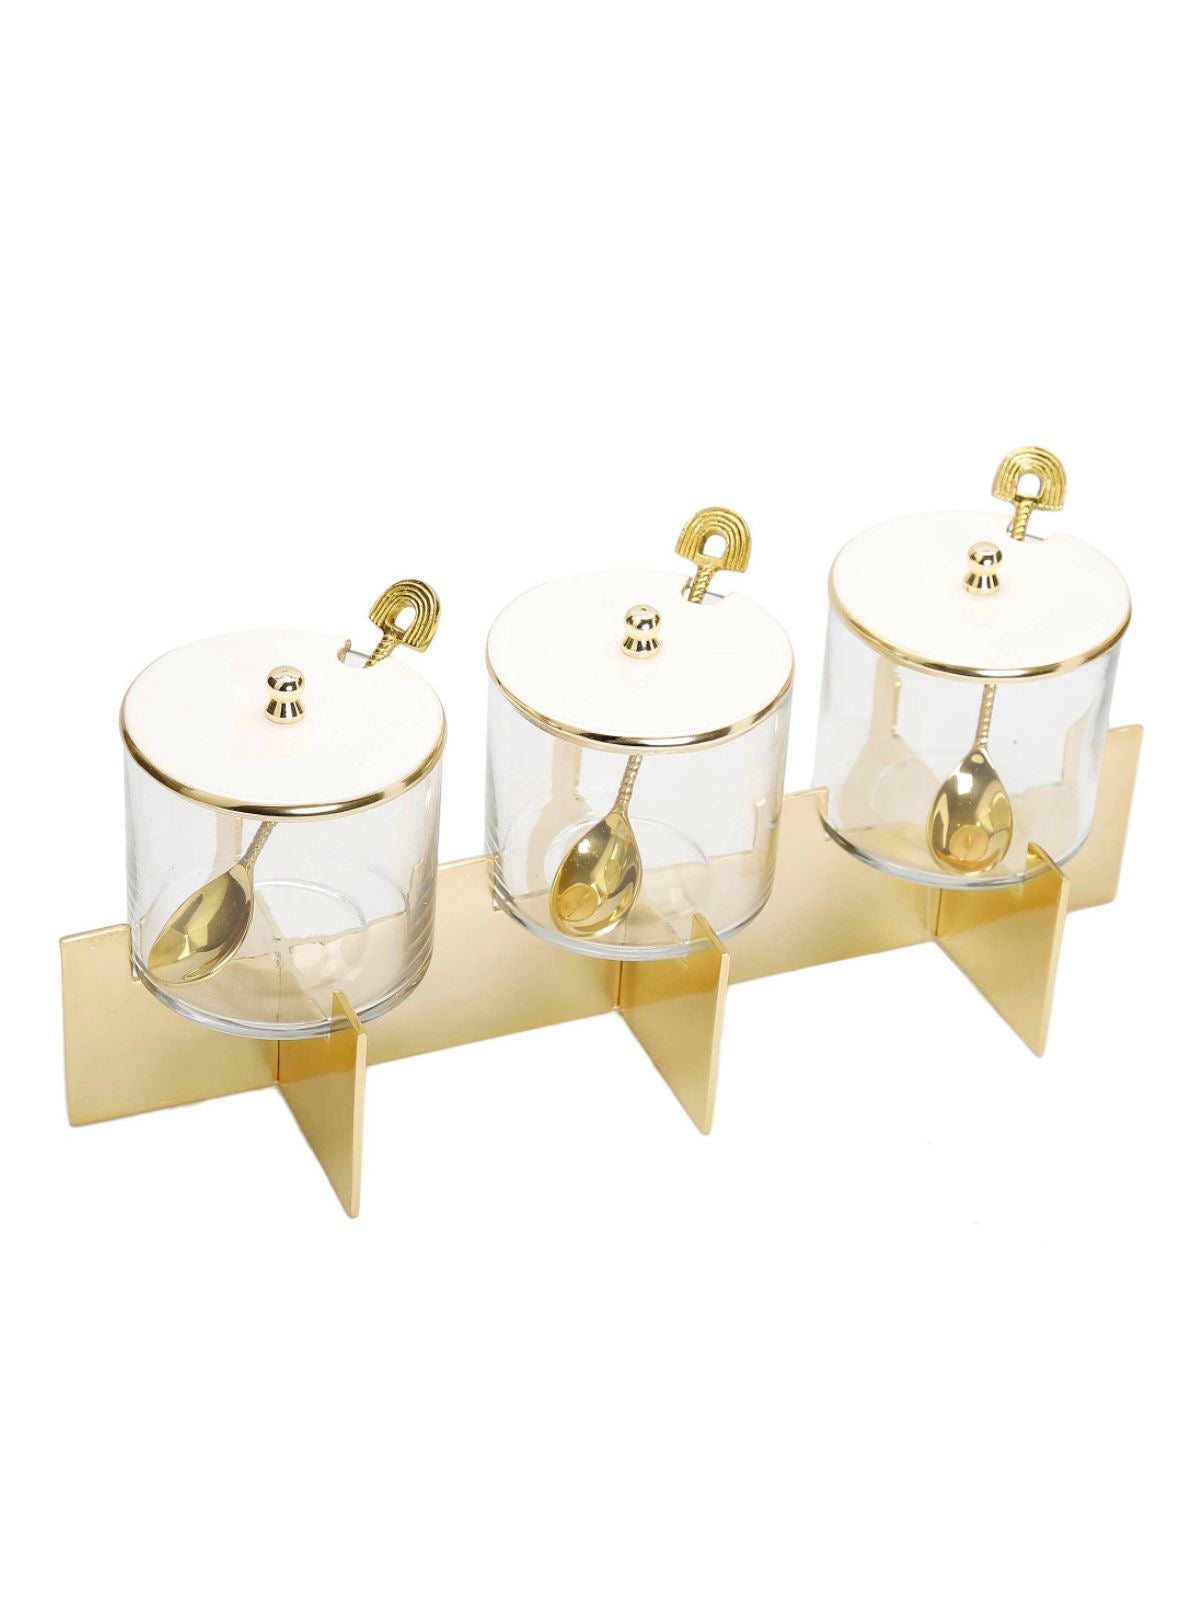 Glass Canister Set on Stainless Steel Gold Block Base with White Marble Lid and 3 Gold Spoons.